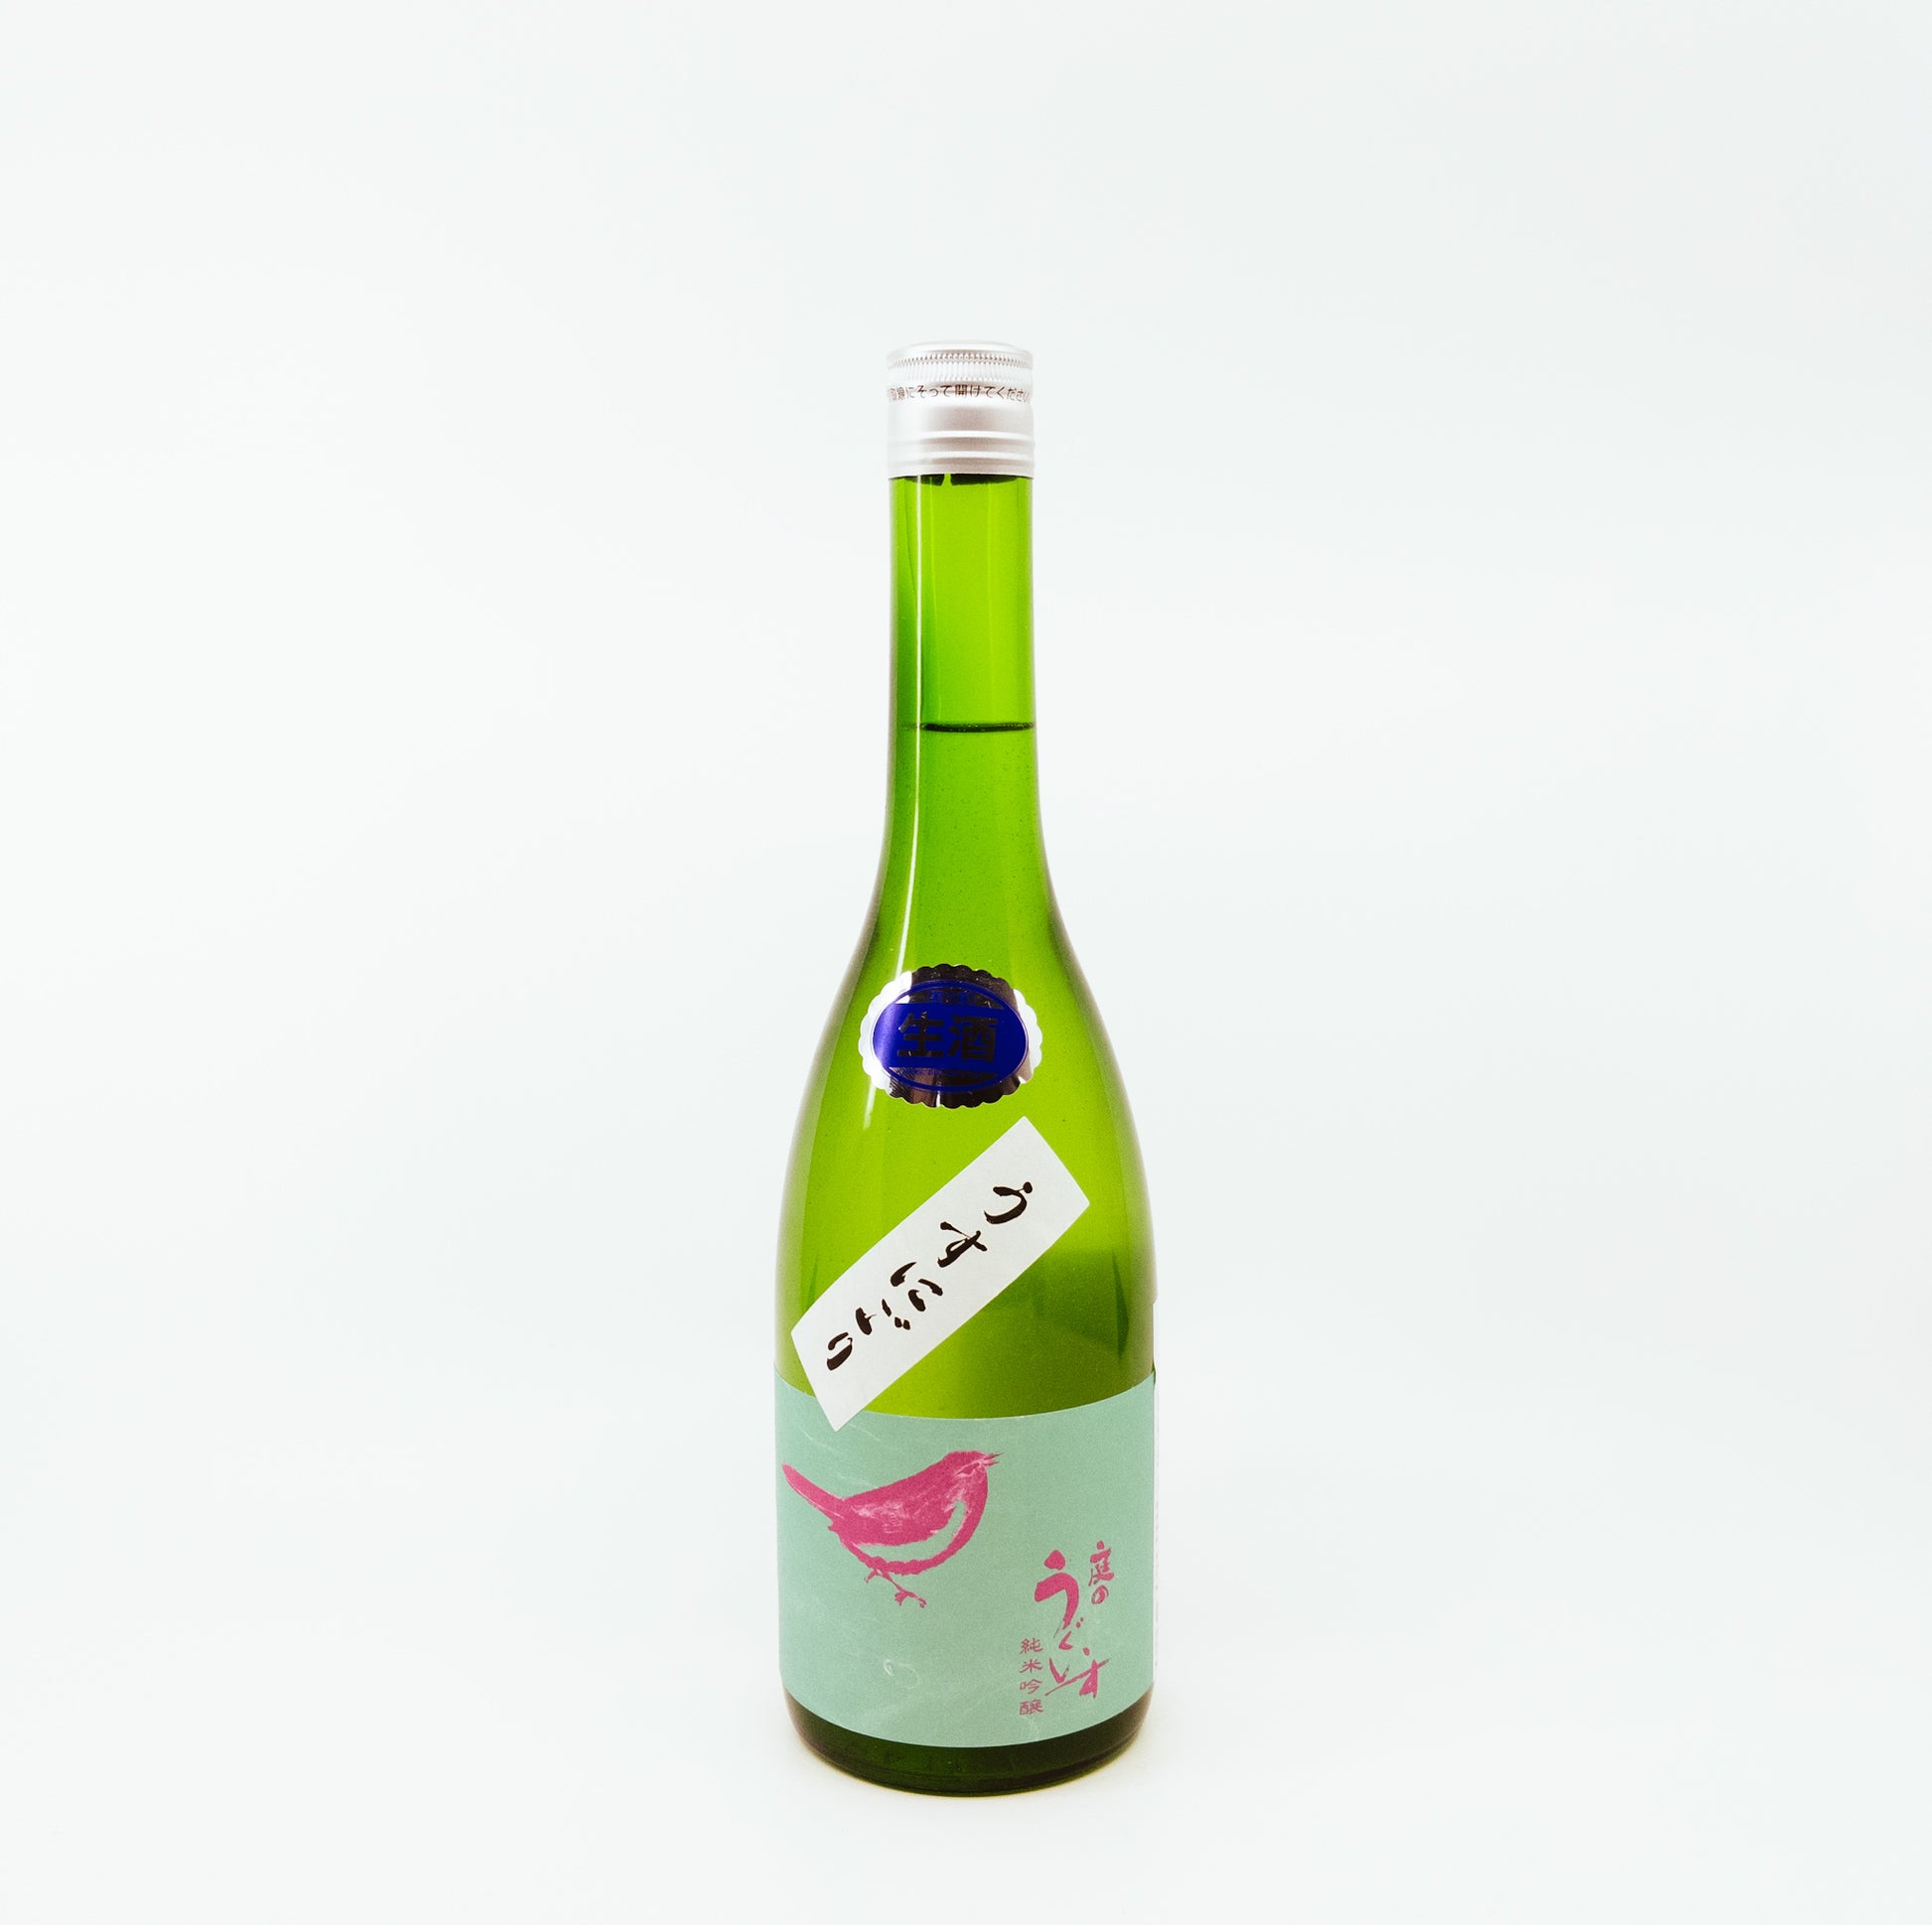 green bottle with pink bird on green label